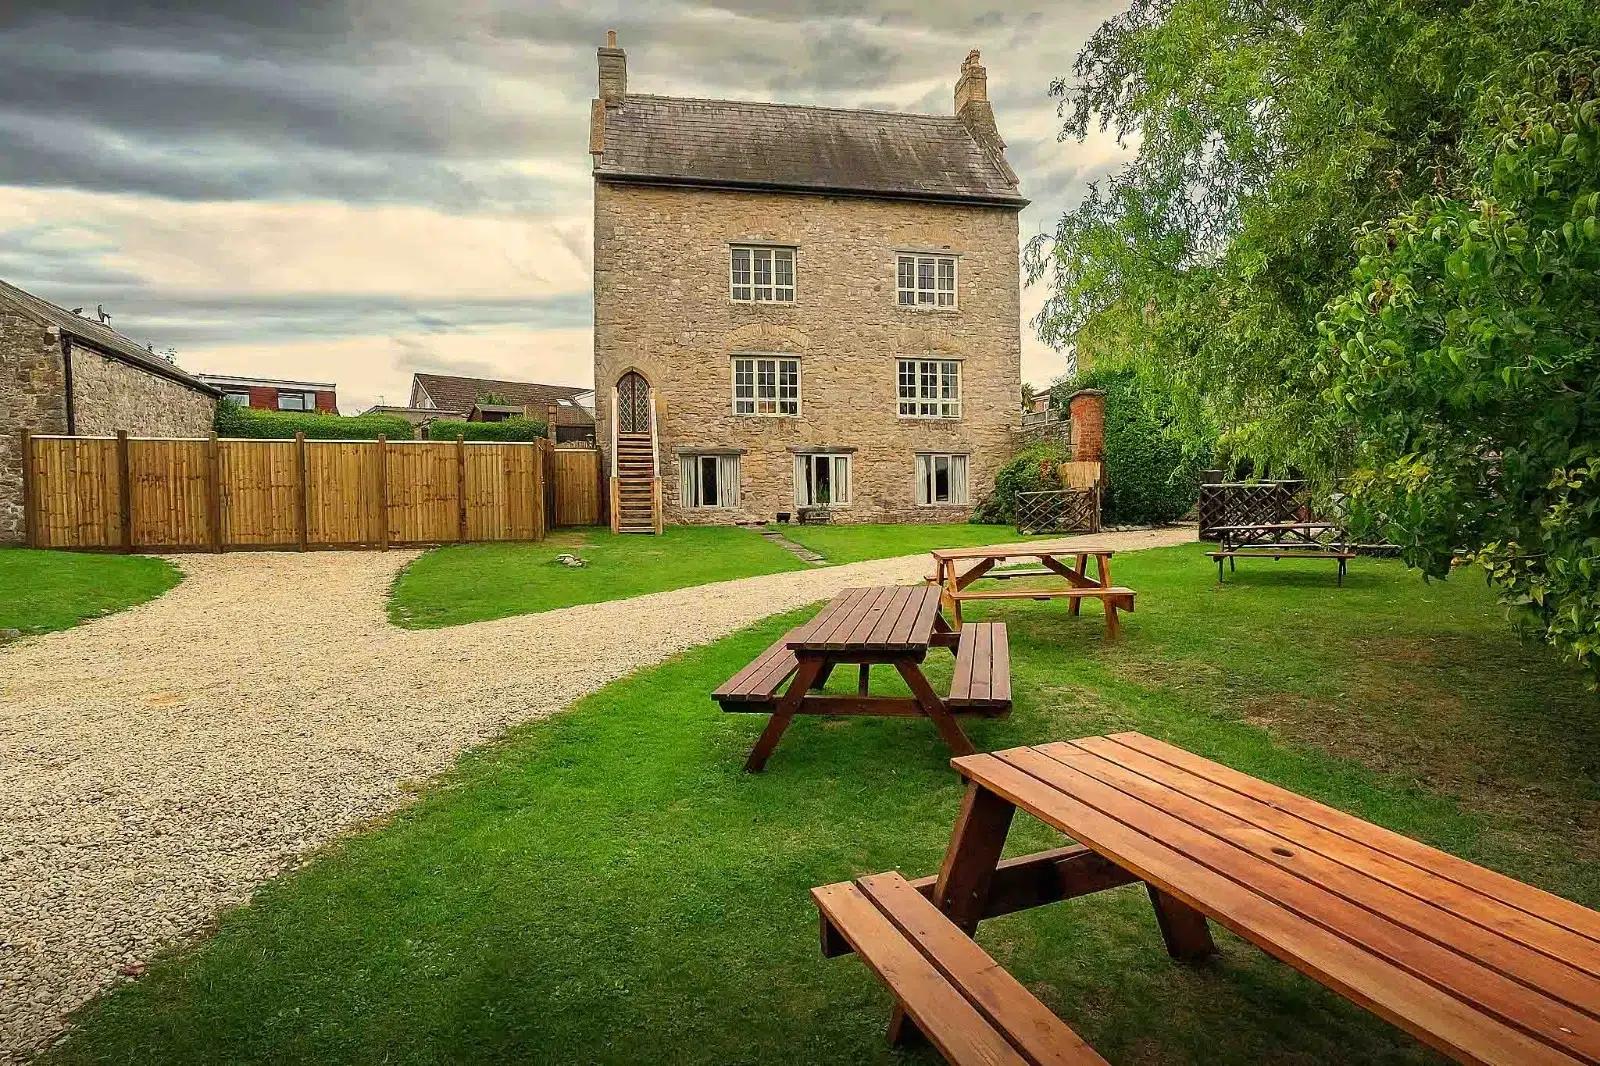 Rent a castle-like house in the UK